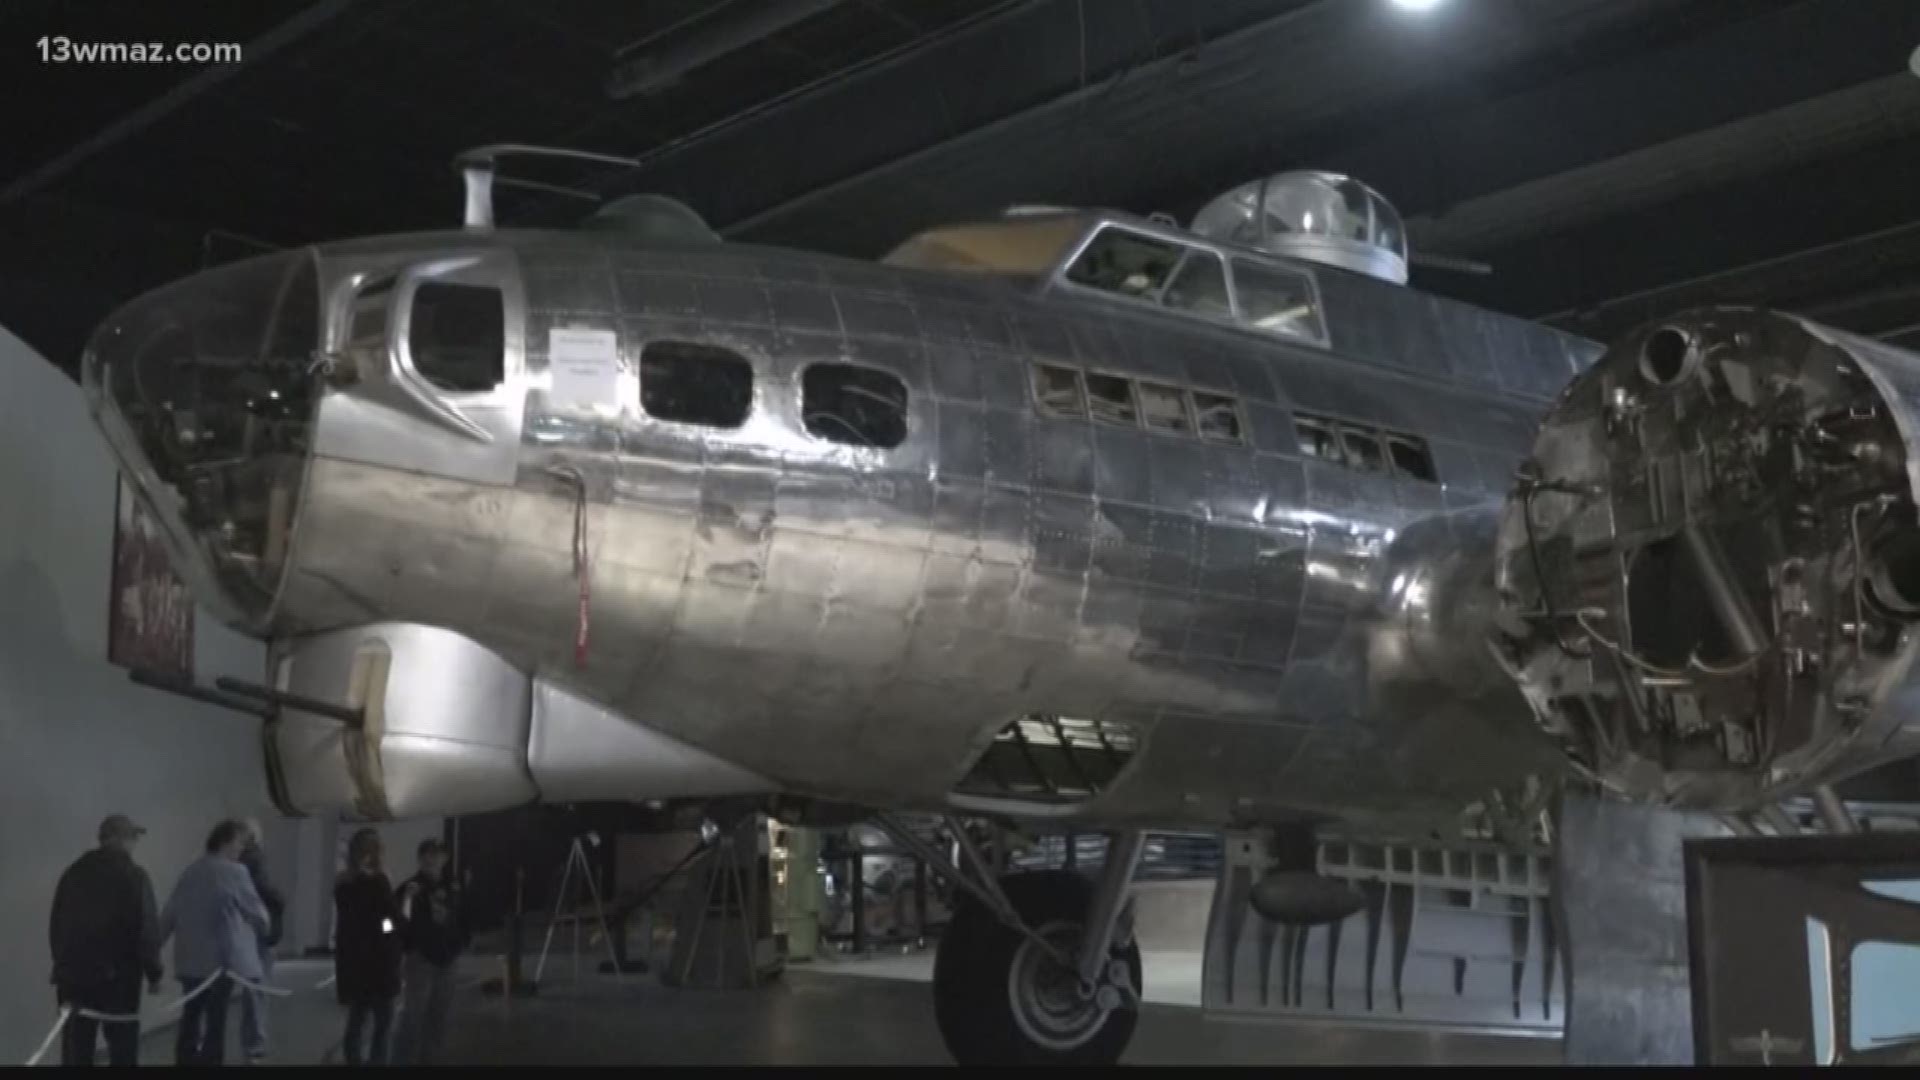 Volunteers at the Museum of Aviation are working to restore a World War II era B-17 to its former glory.